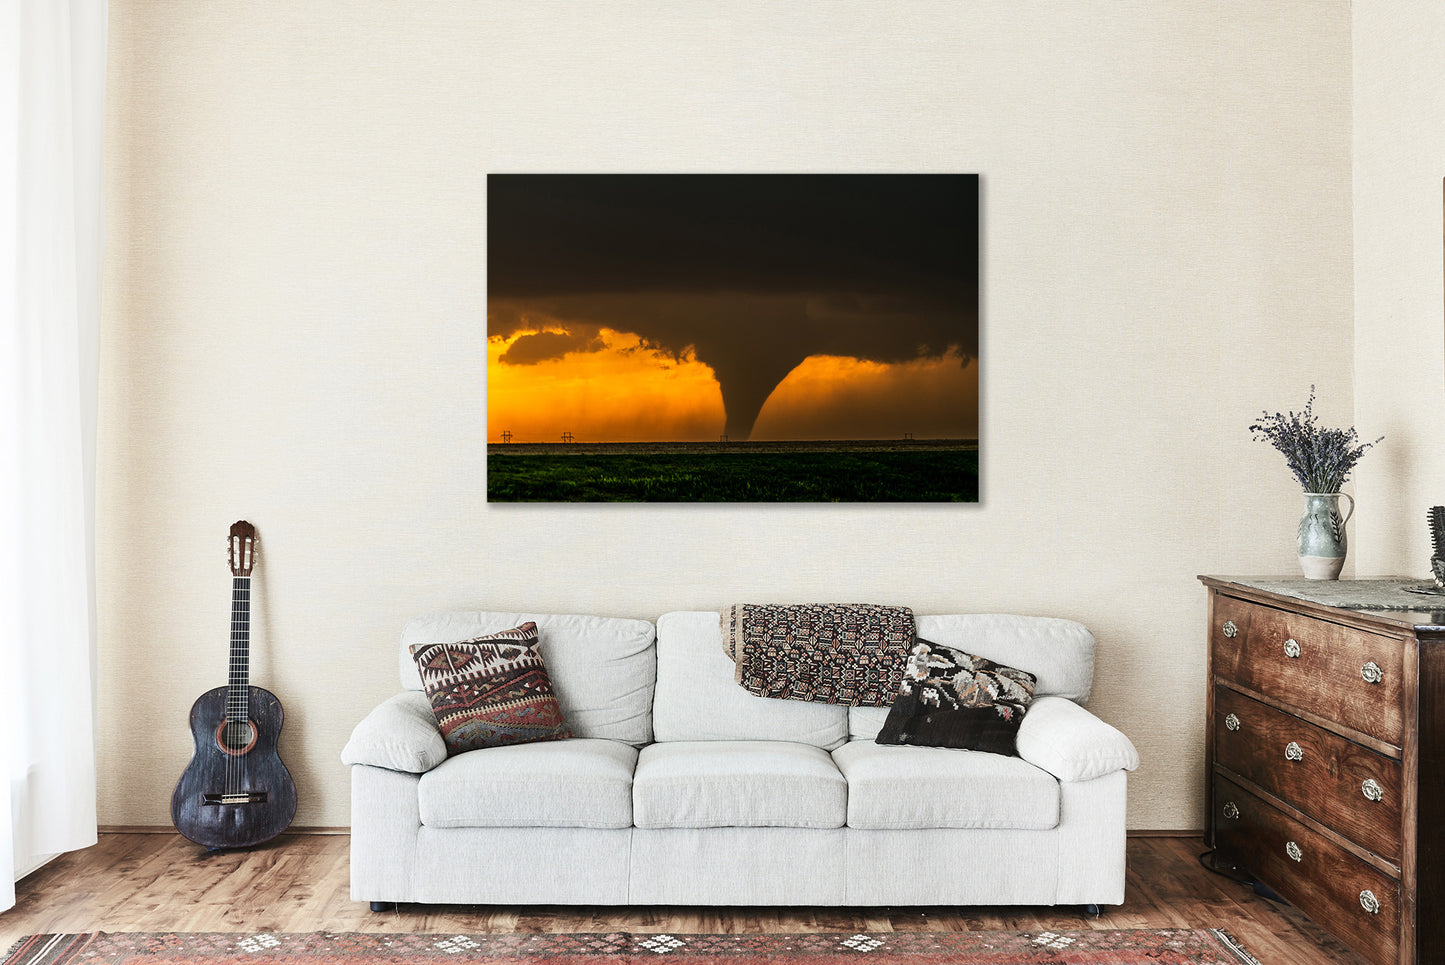 Storm Canvas Wall Art (Ready to Hang) Gallery Wrap of Large Tornado Appearing as Silhouette Against Evening Sky at Sunset in Kansas Thunderstorm Photography Weather Decor